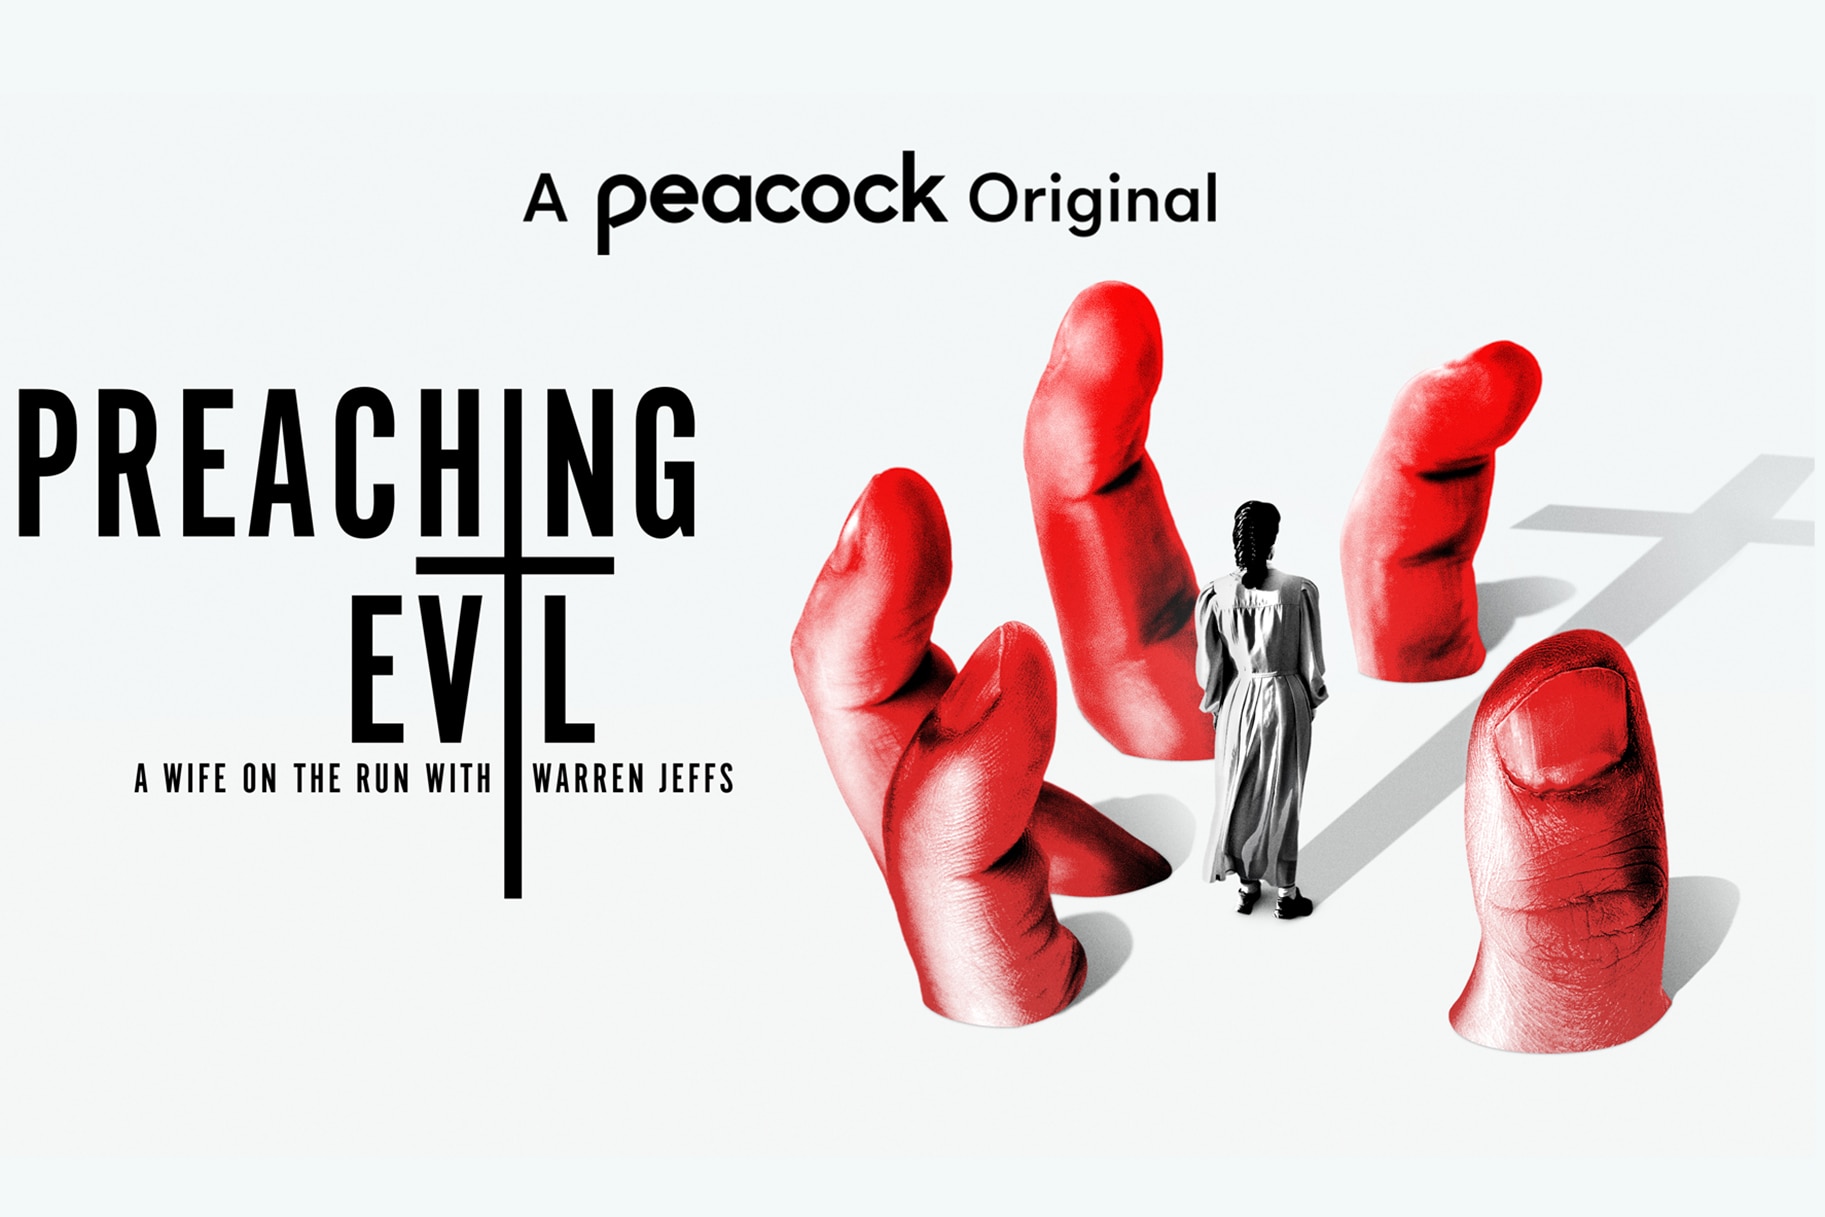 Preaching Evil a new Peacock documentary.